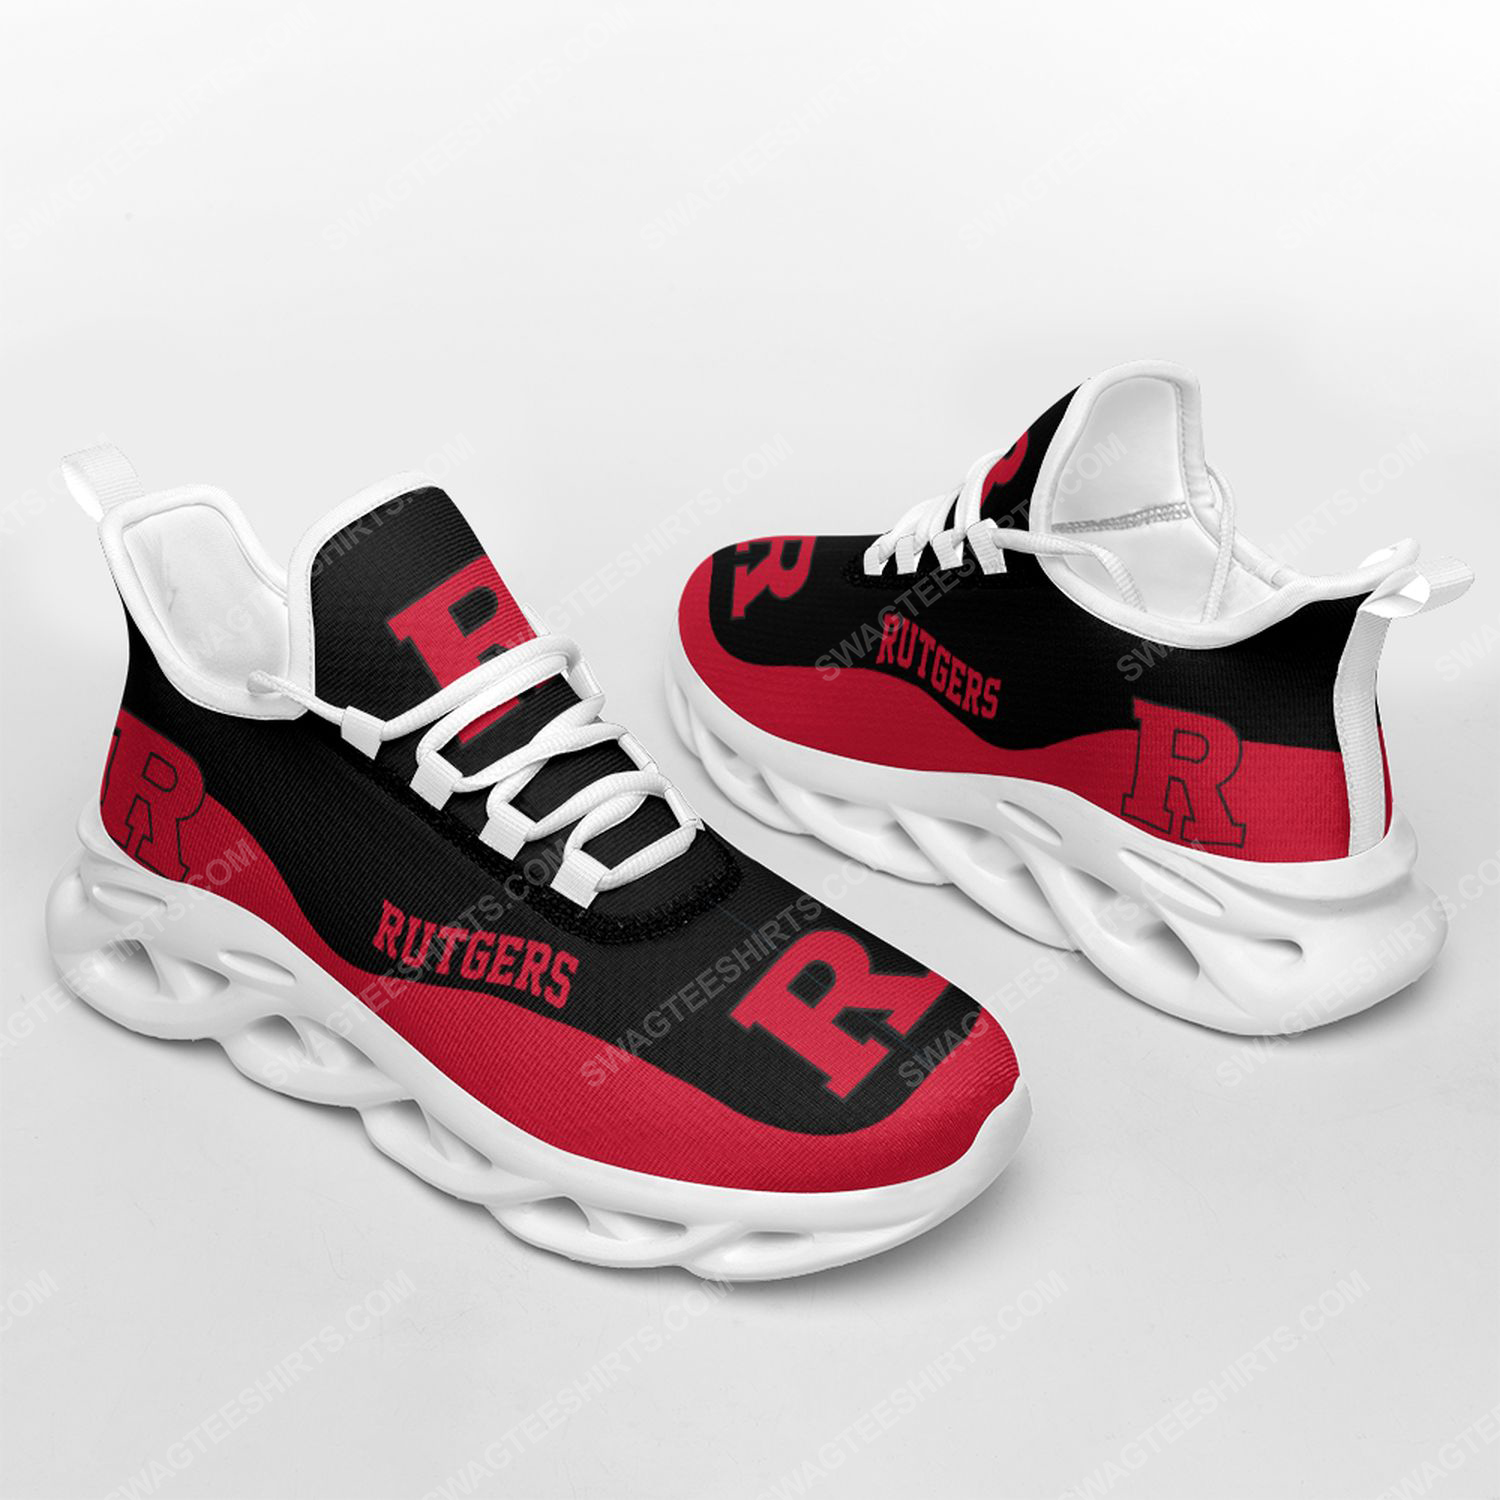 [special edition] Rutgers scarlet knights football team max soul shoes – Maria